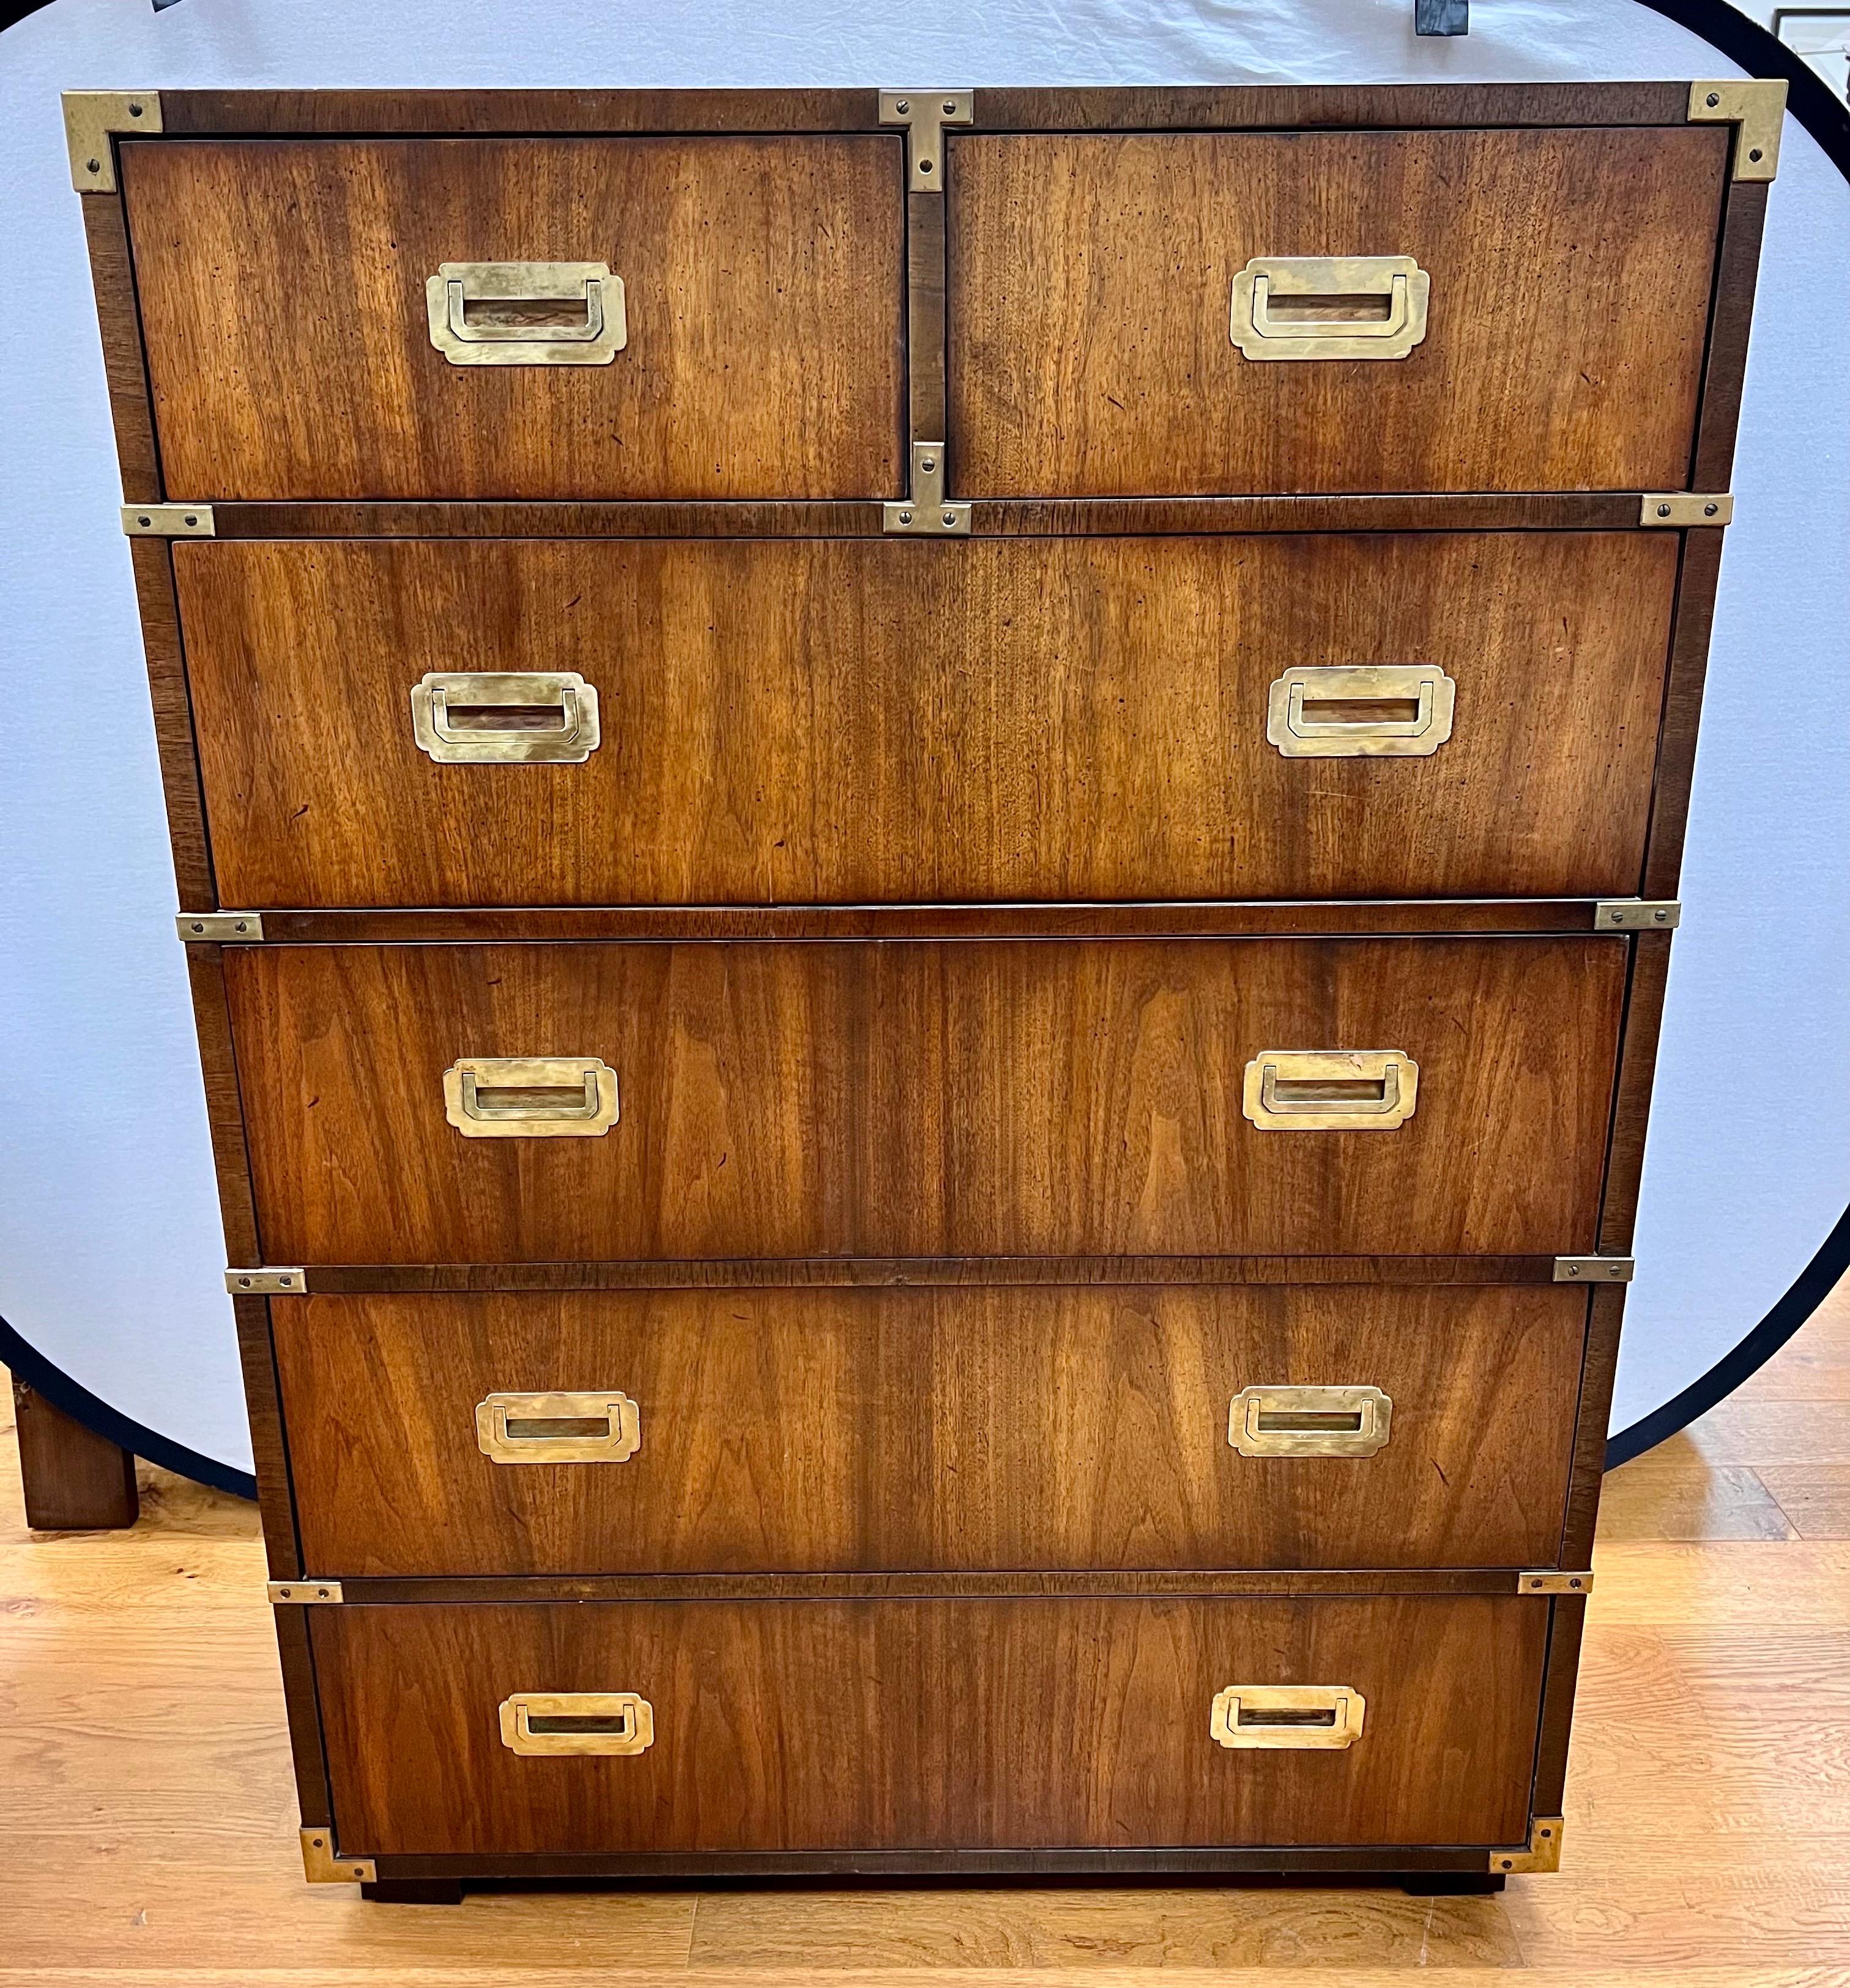 Vintage Lane Alta Vista campaign style walnut tall chest dresser with six dovetailed drawers and recessed brass pulls and hardware. In great condition.  Made in Altavista, VA in the 1970's.